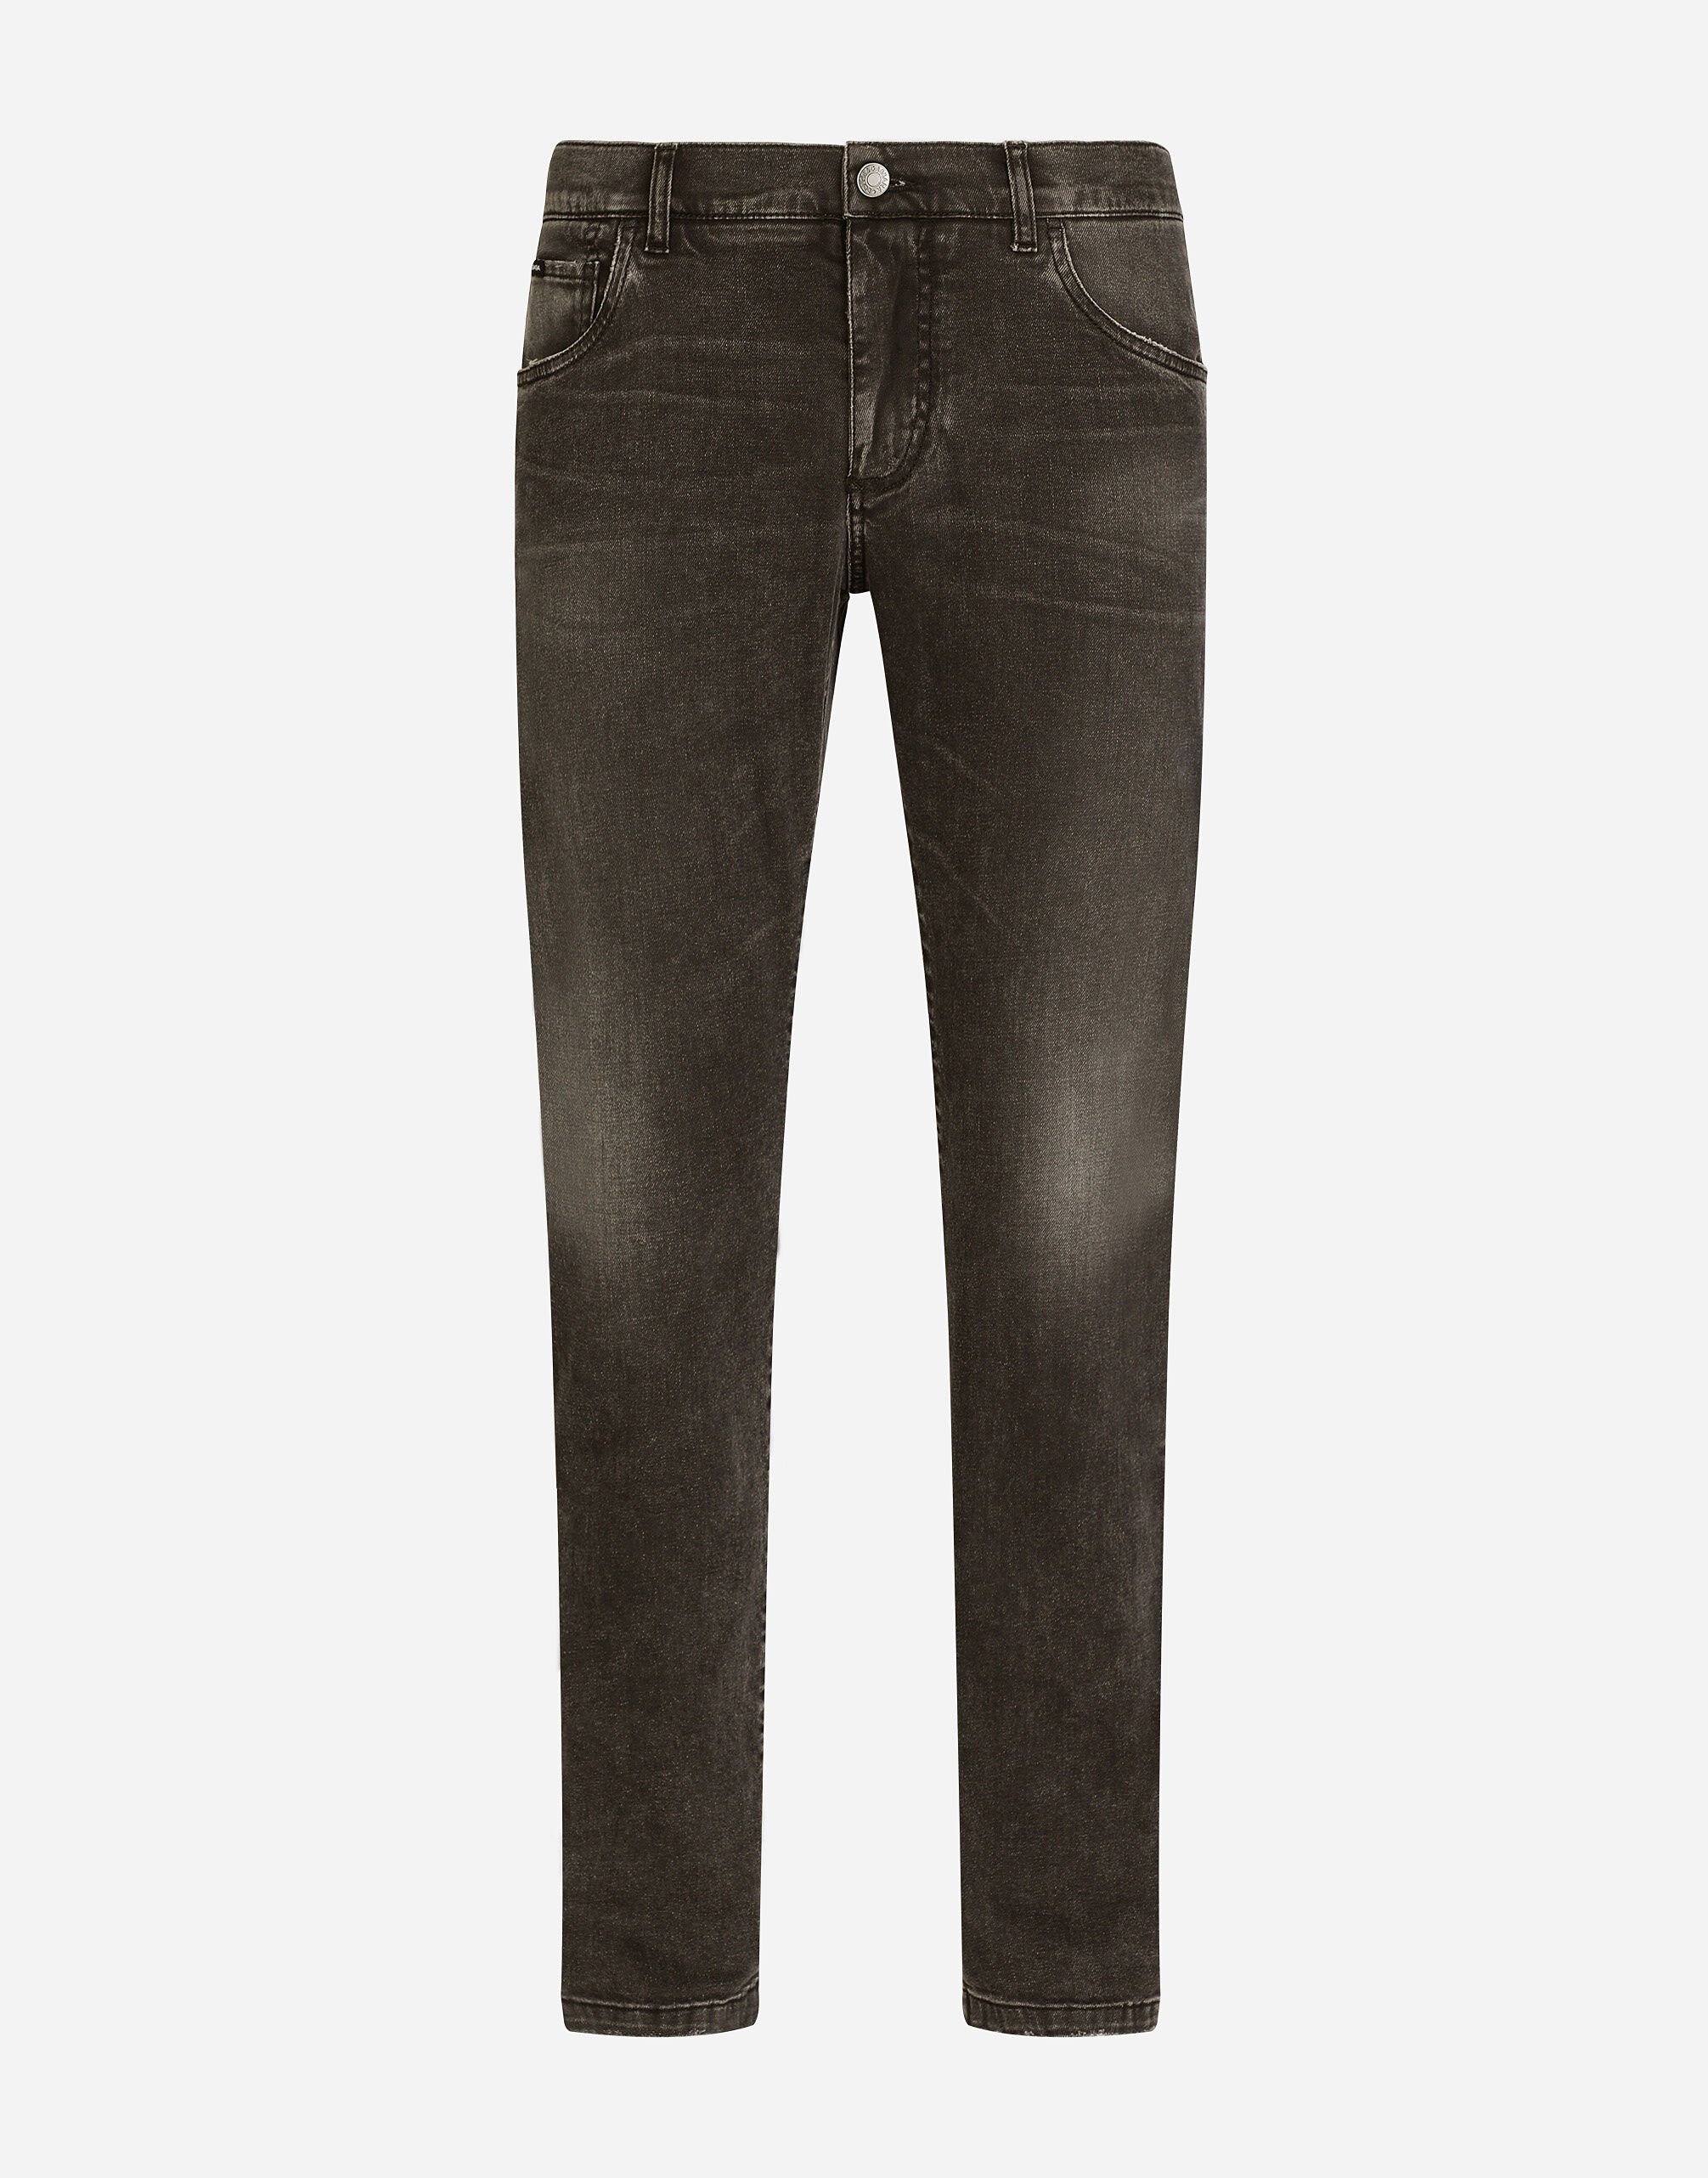 Buy Ash Grey Jeans & Jeggings for Women by G STAR RAW Online | Ajio.com